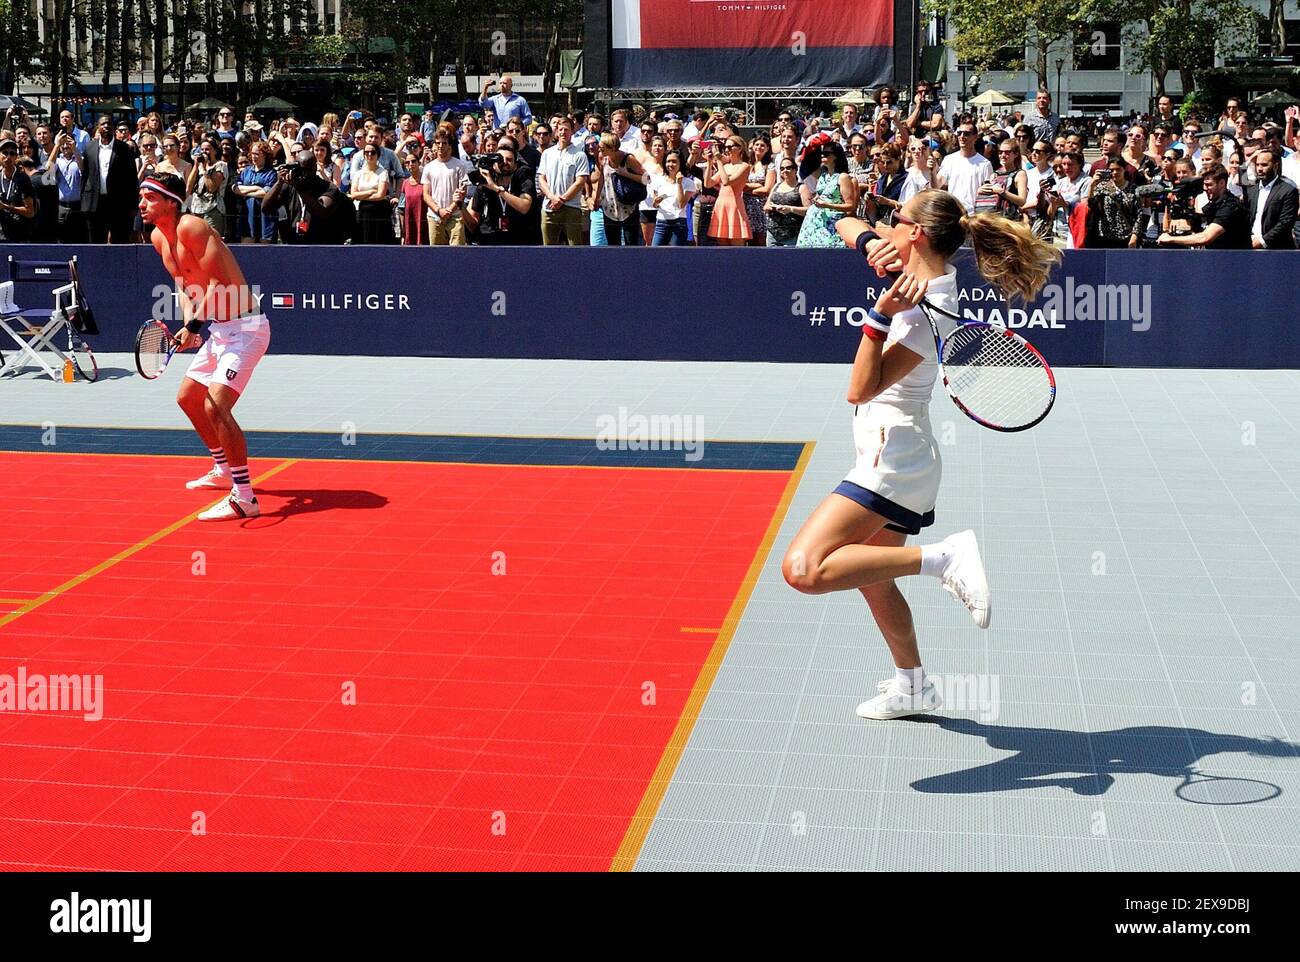 Model Hannah Davis hits a volley while model Arthur Kulkov watches at the Tommy  Hilfiger "TommyXNadal" celebrity tennis event in Bryant Park in New York,  NY on August 25, 2015. (Photo by